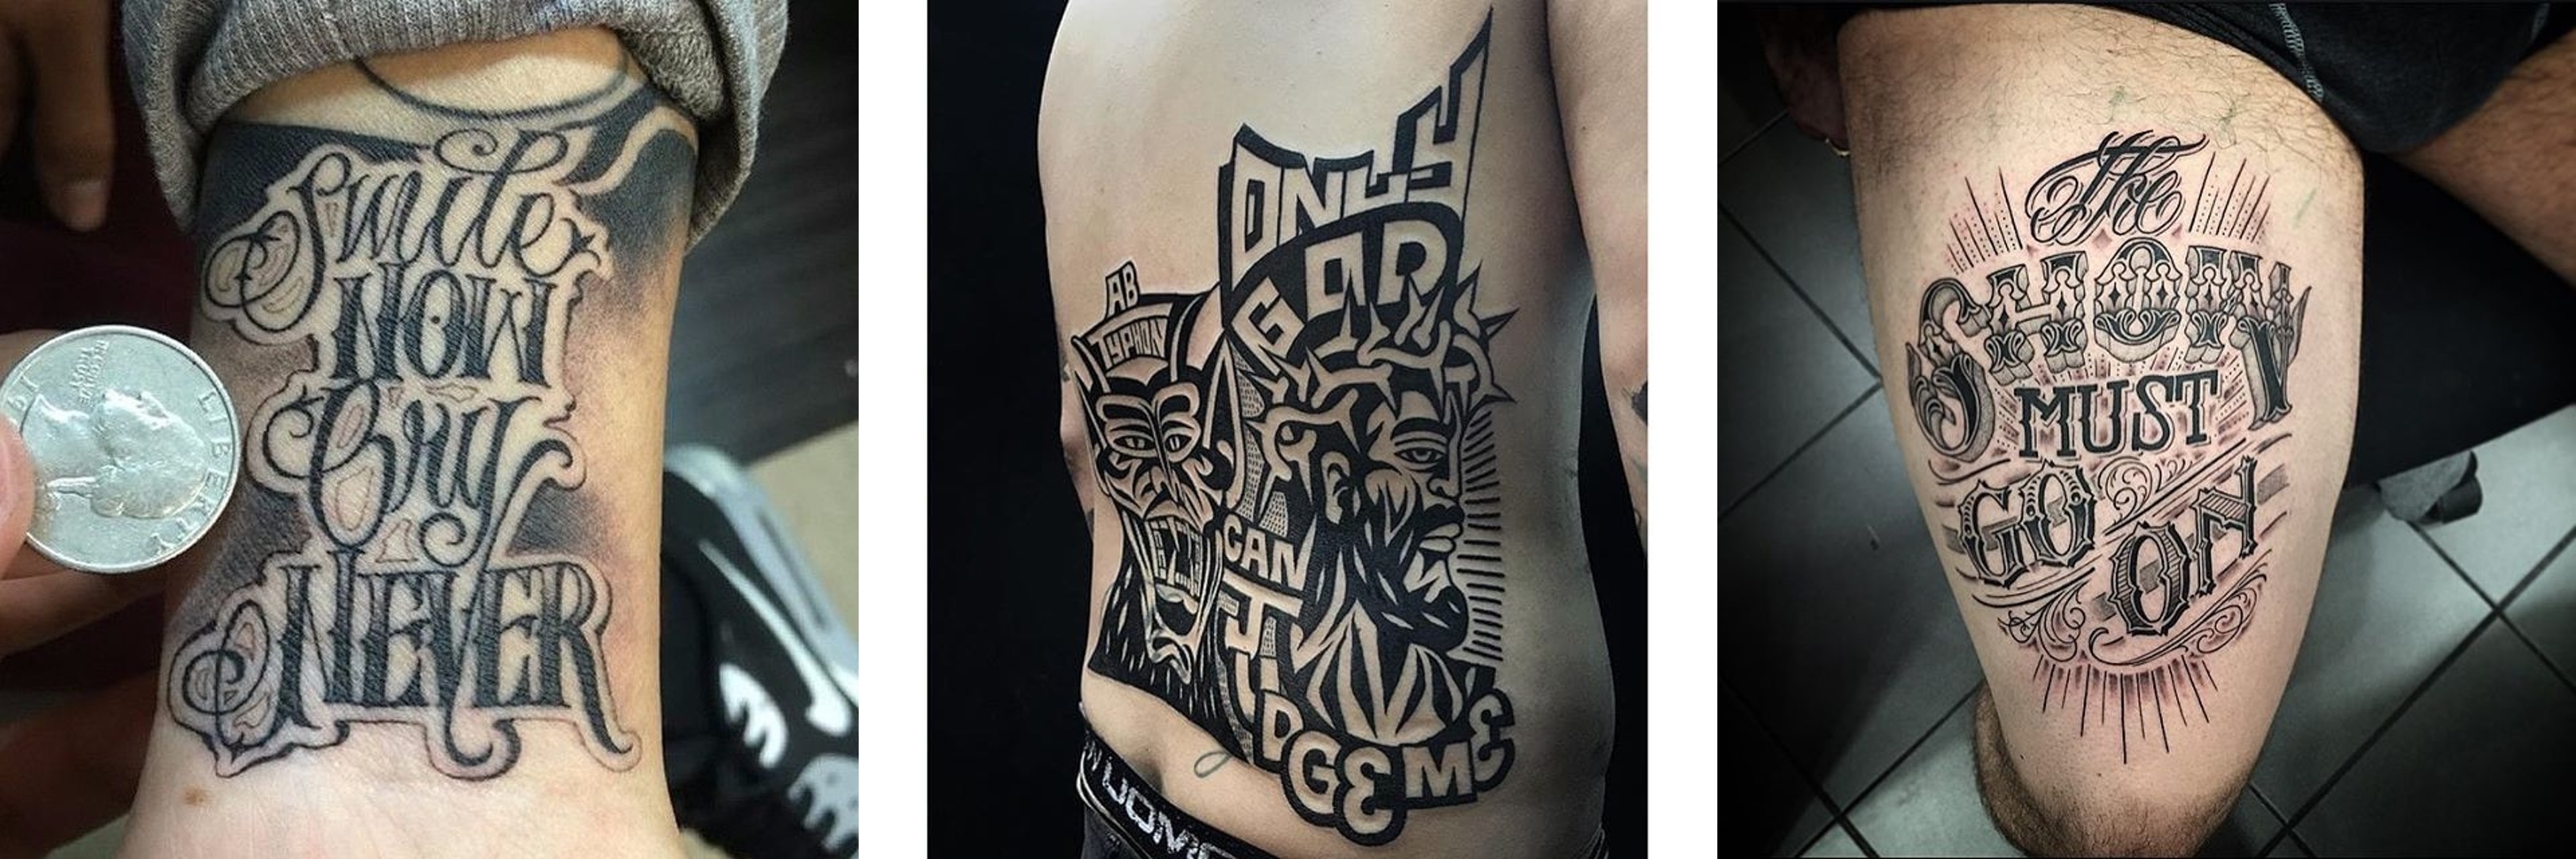 Lettering Tattoo, LTR: Bogus Tattoo, luxiano_street_classic, ttering Tattoo by Pierr Oked